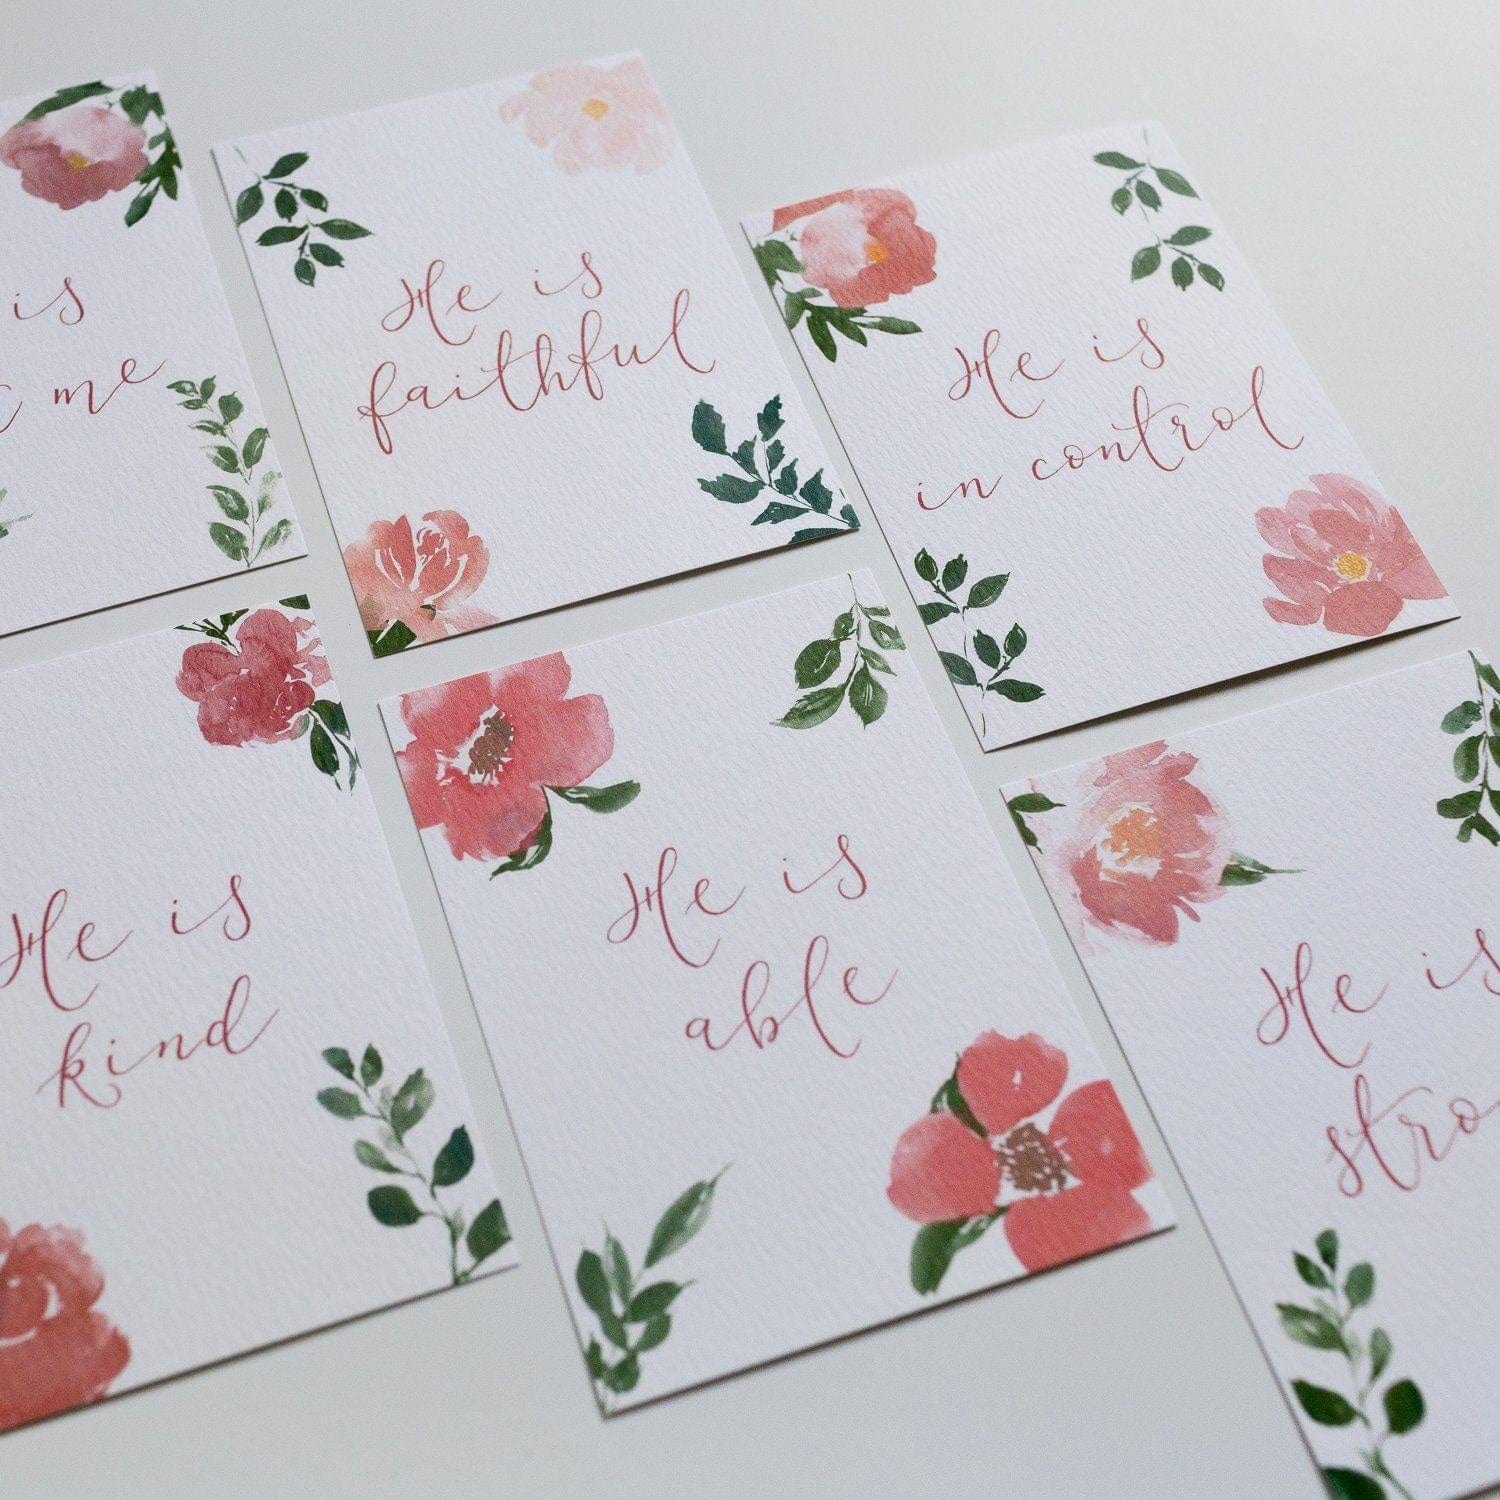 Set of 6 “This I know” postcards And Hope Designs Cards